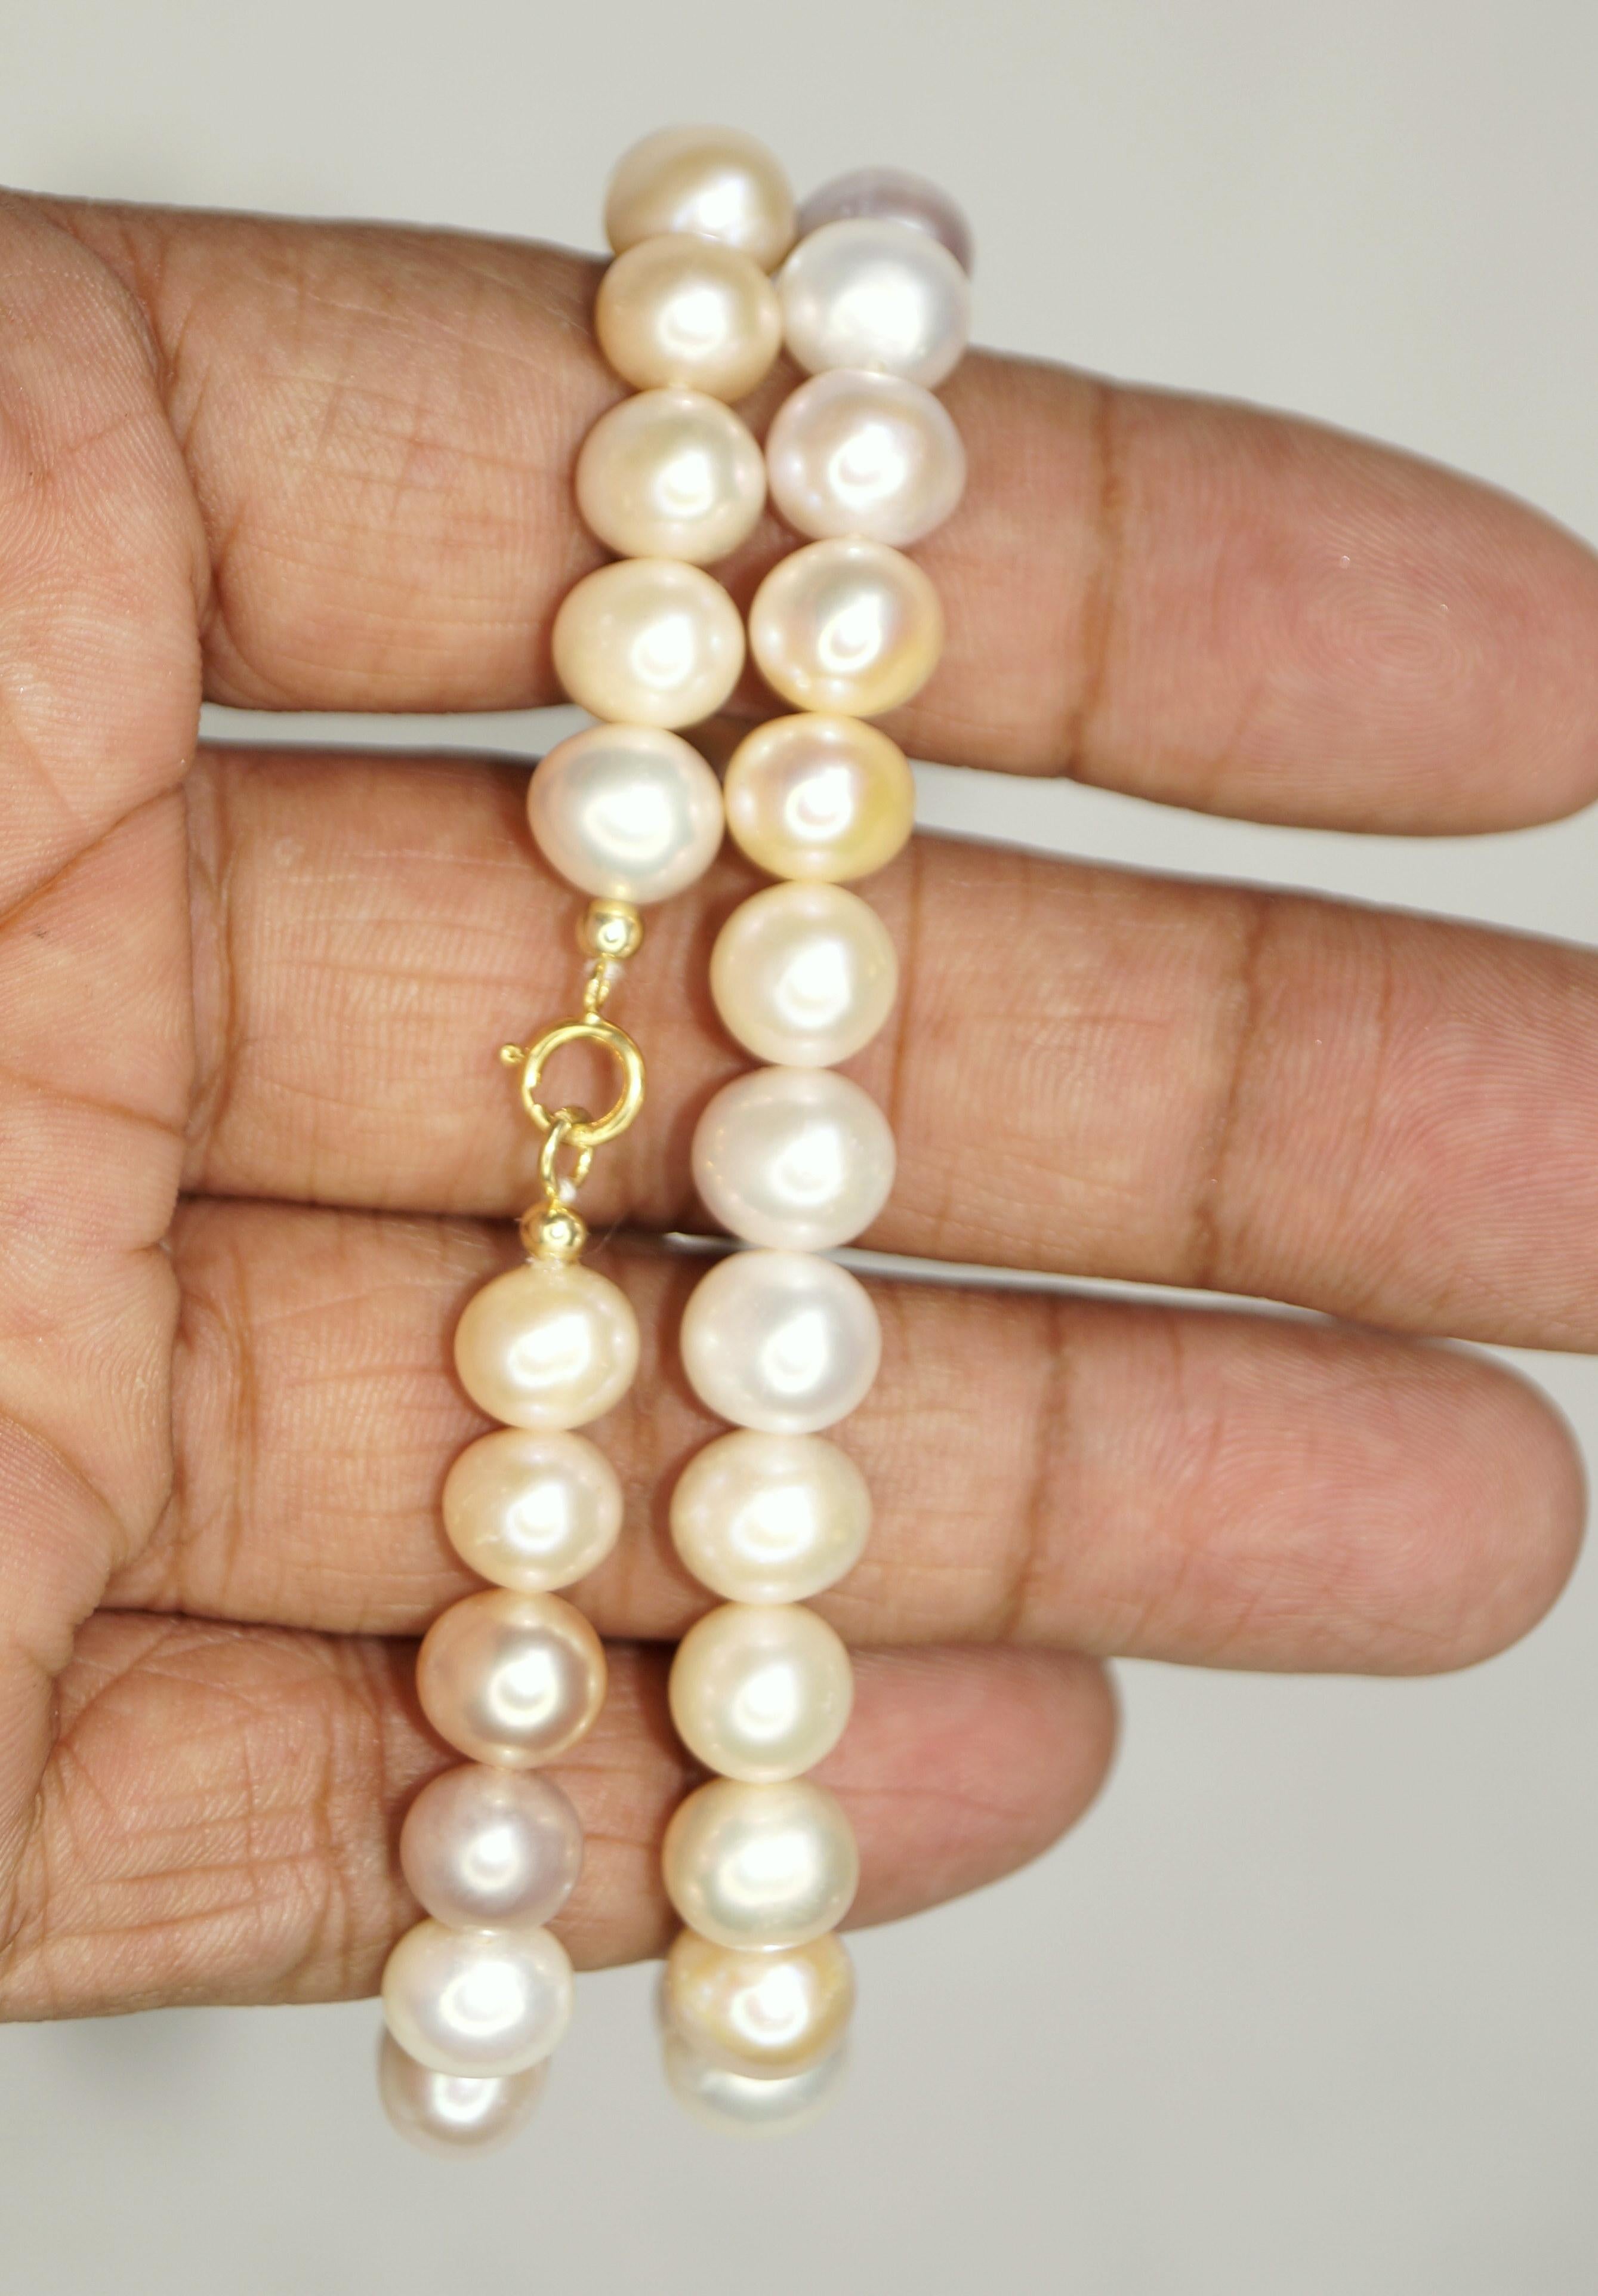 14k Gold Golden Cream mix Pearl necklace 14mm Freshwater Round Pearl necklace 5